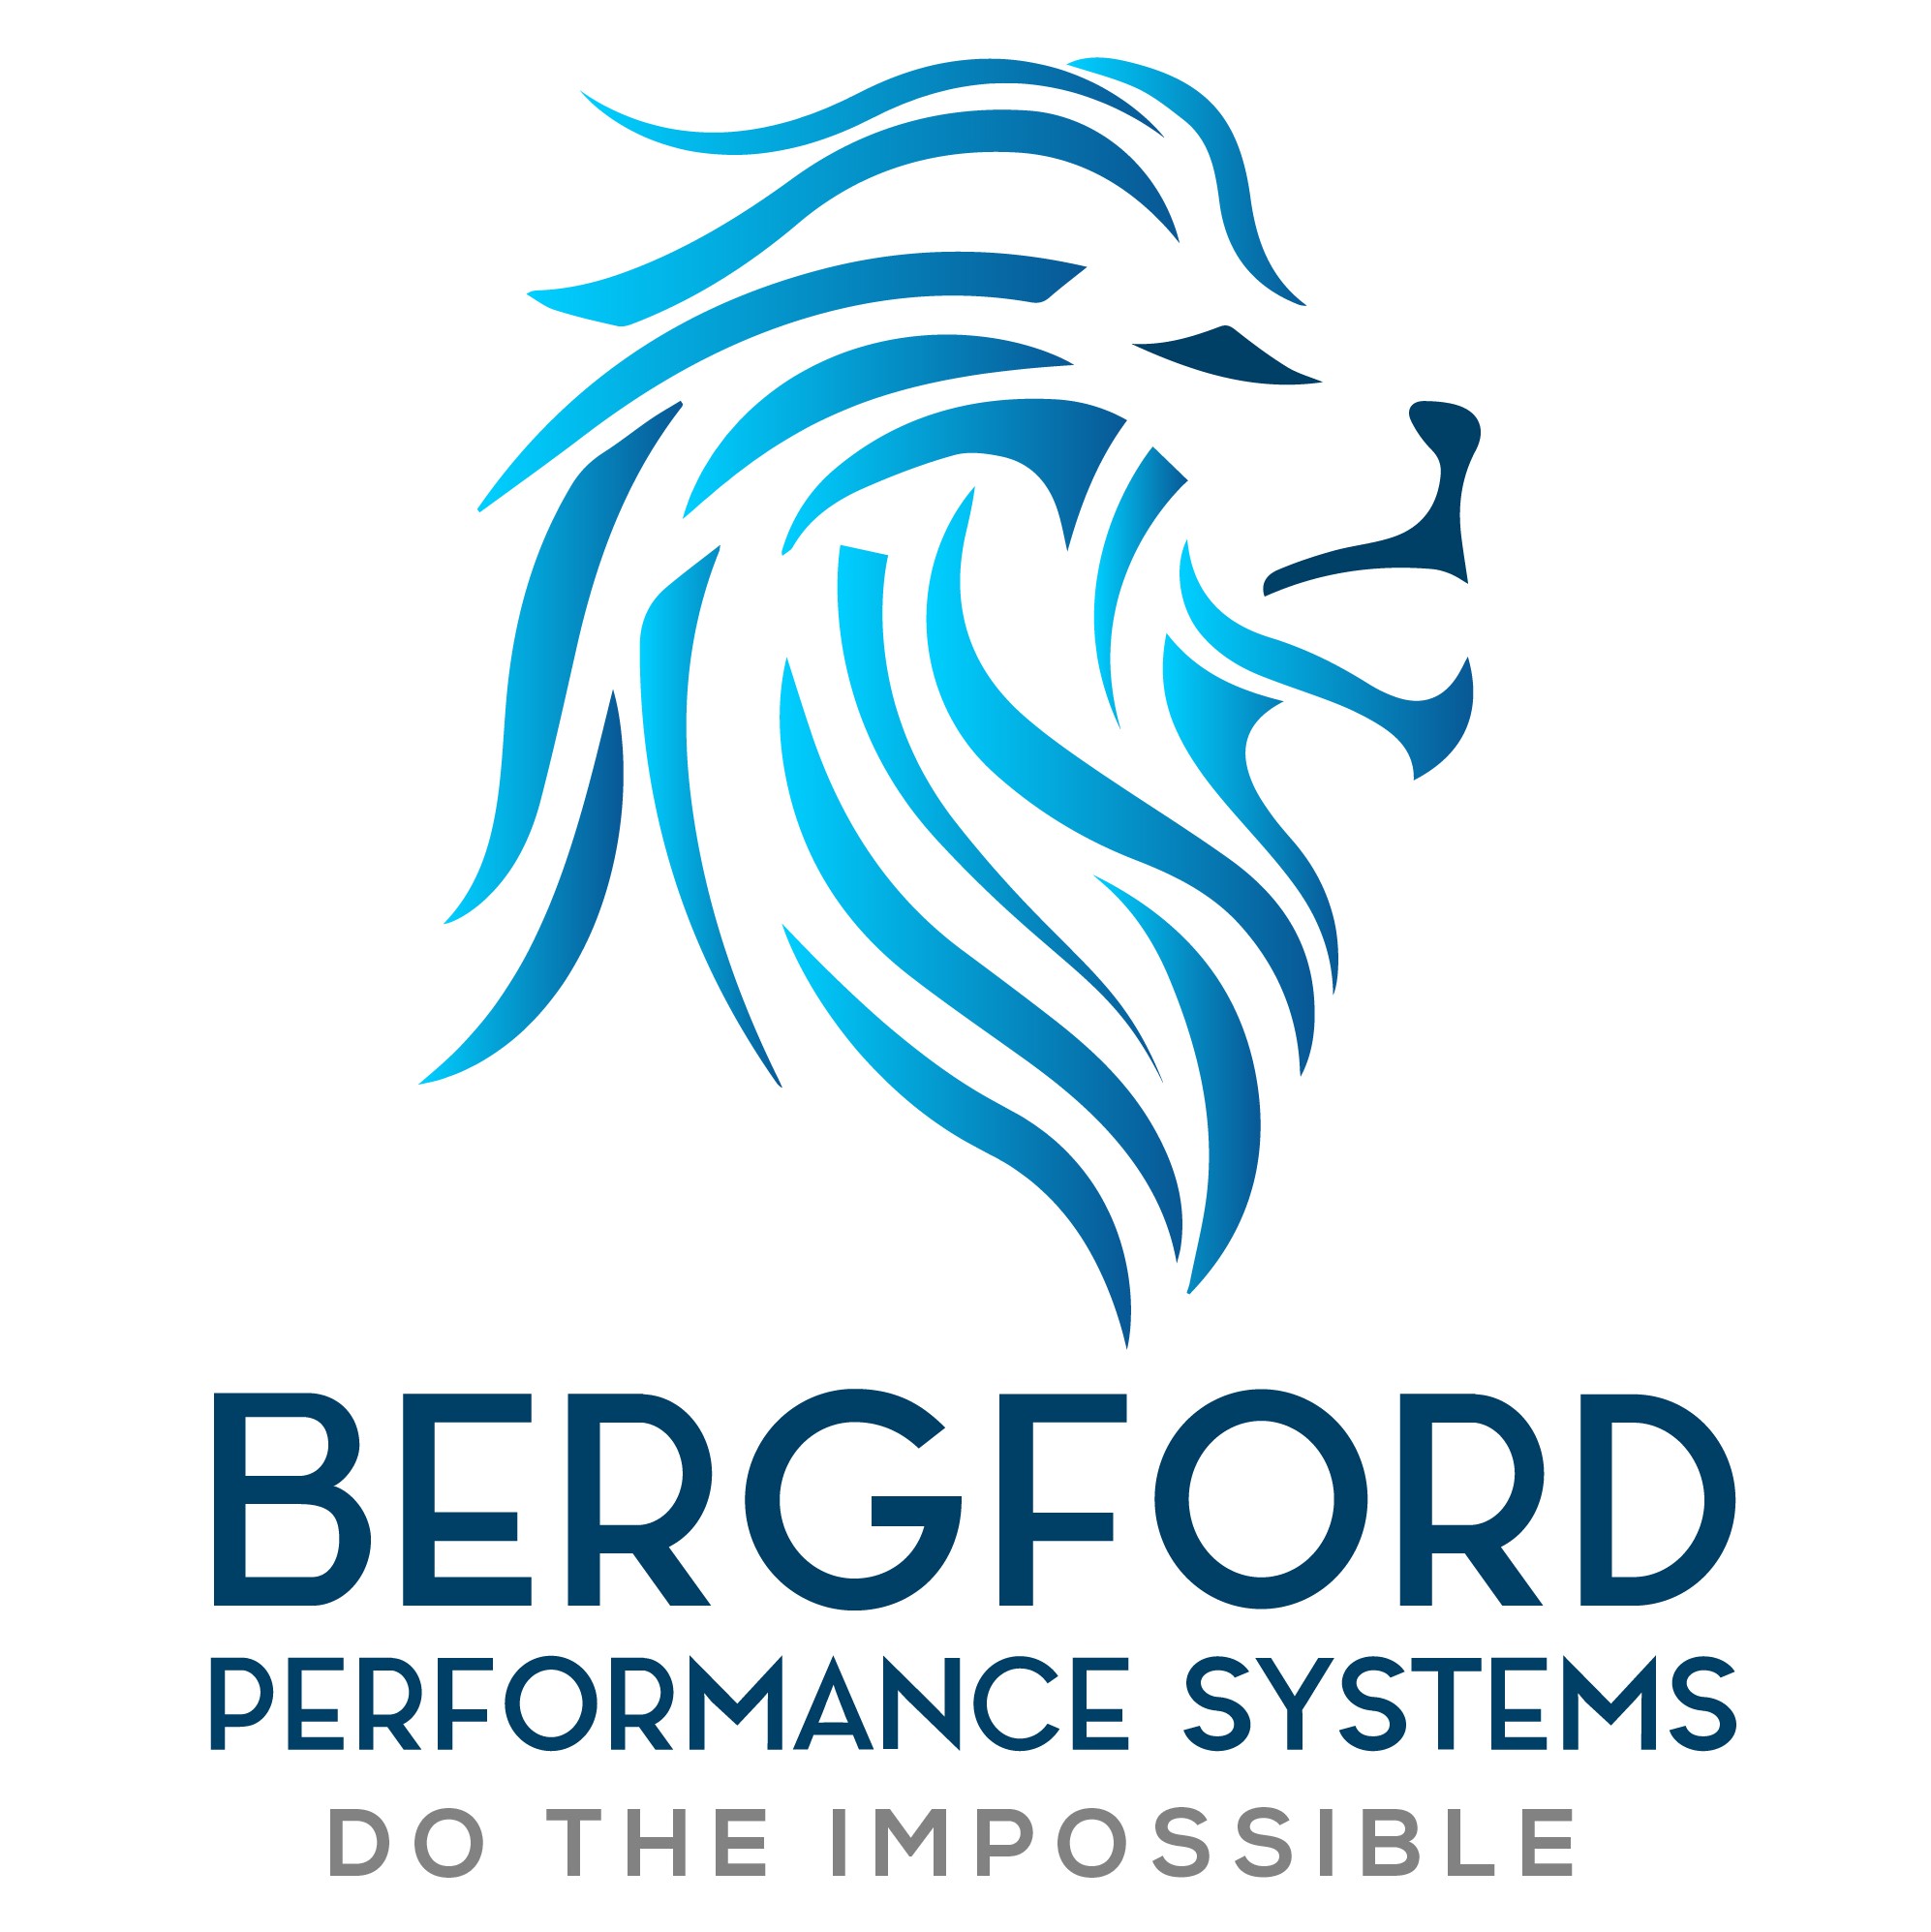 Bergford Performance Systems